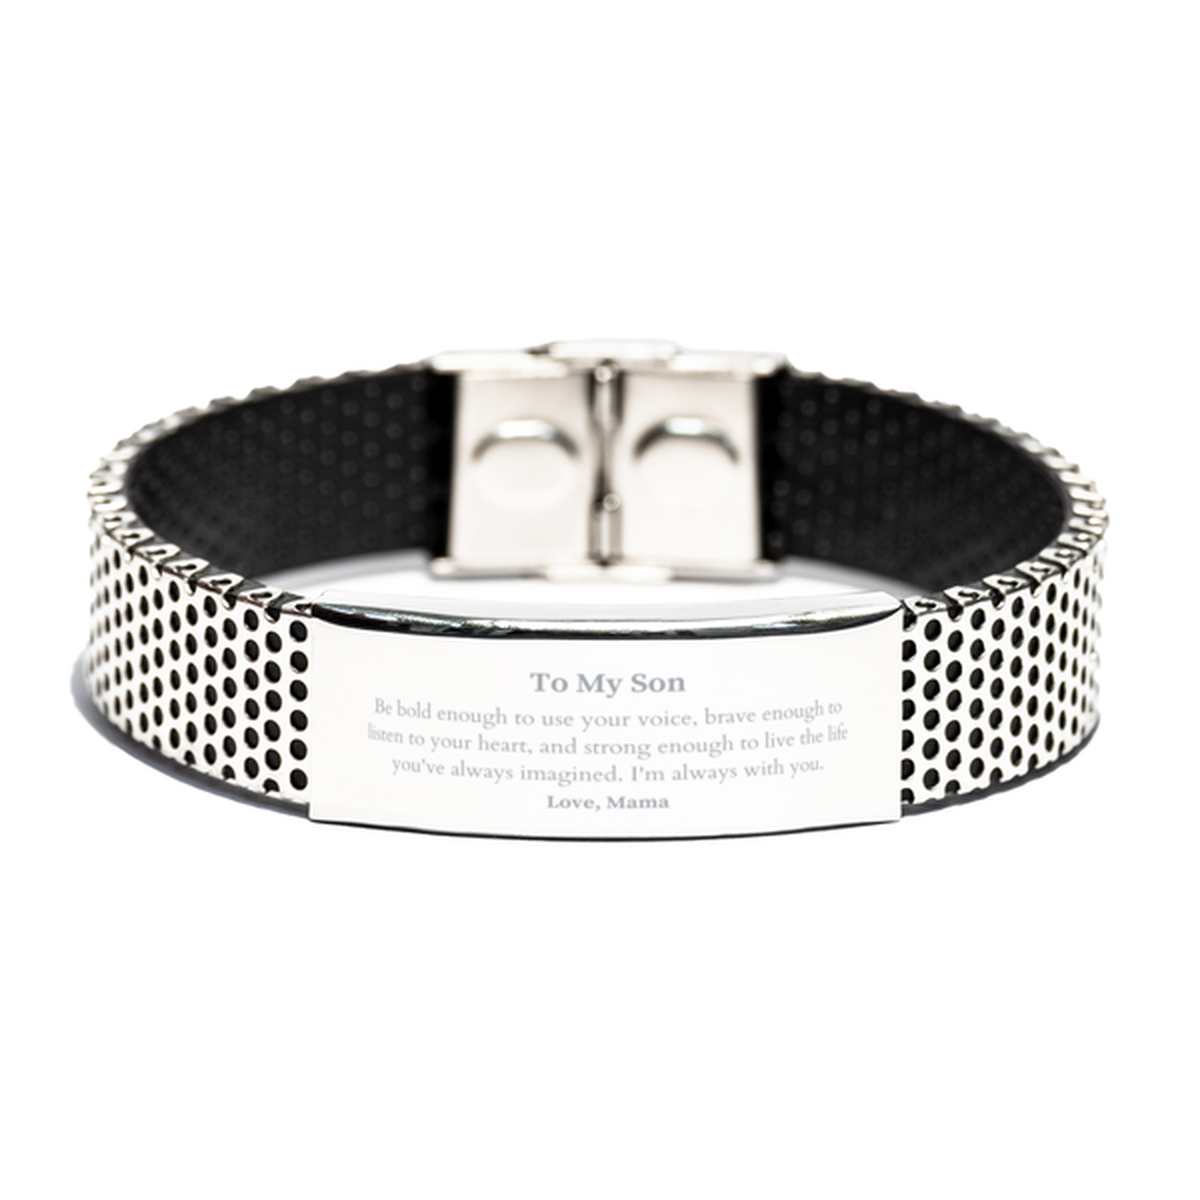 Keepsake Son Stainless Steel Bracelet Gift Idea Graduation Christmas Birthday Son from Mama, Son Be bold enough to use your voice, brave enough to listen to your heart. Love, Mama